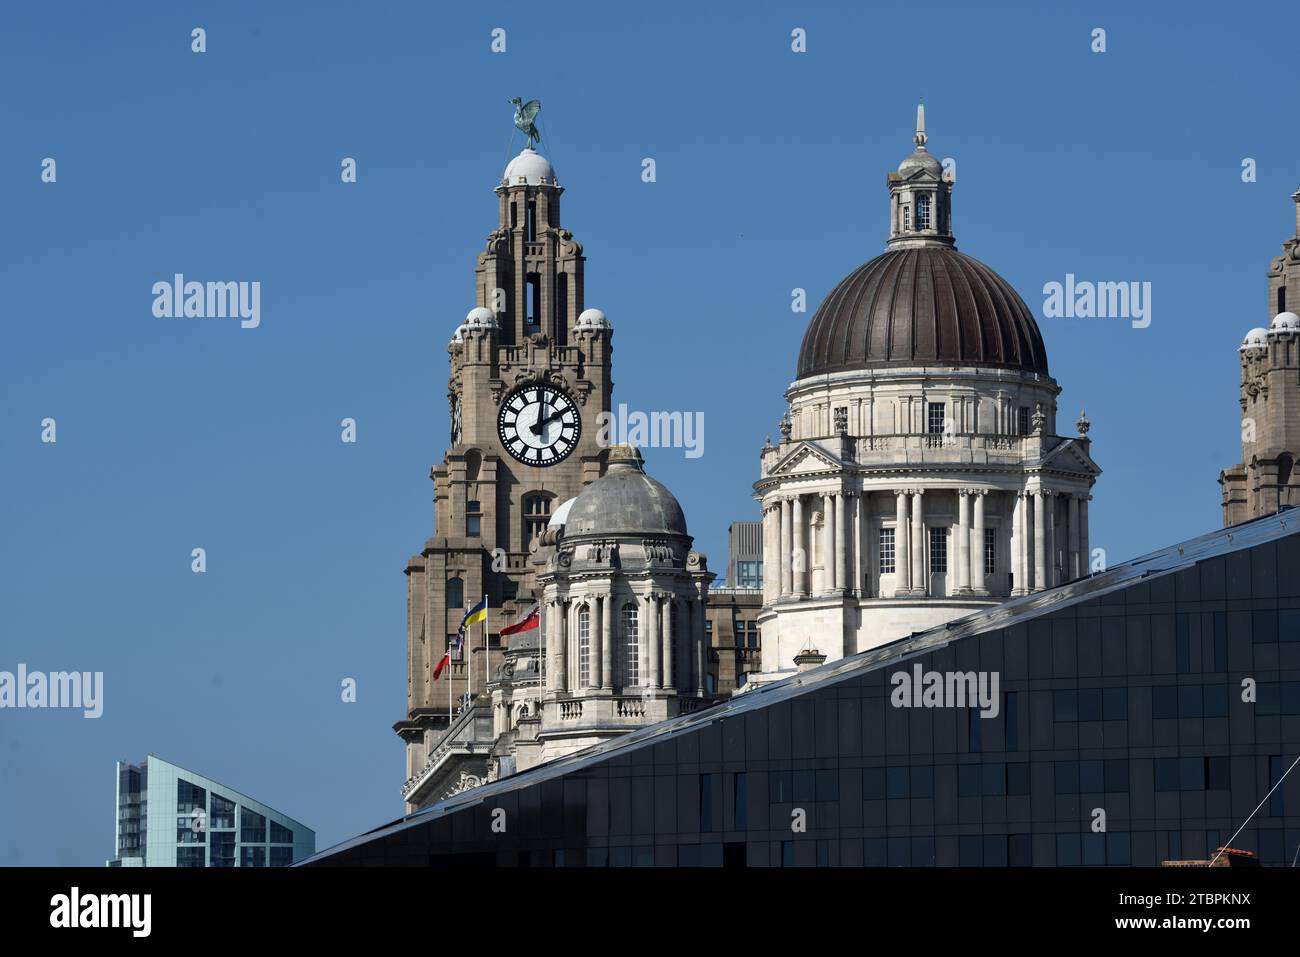 The Three Graces Liverpool including Dome of the Port of Liverpool Building & Clock Tower of the Royal Liver Building (1908-11) Pier Head Liverpool Stock Photo